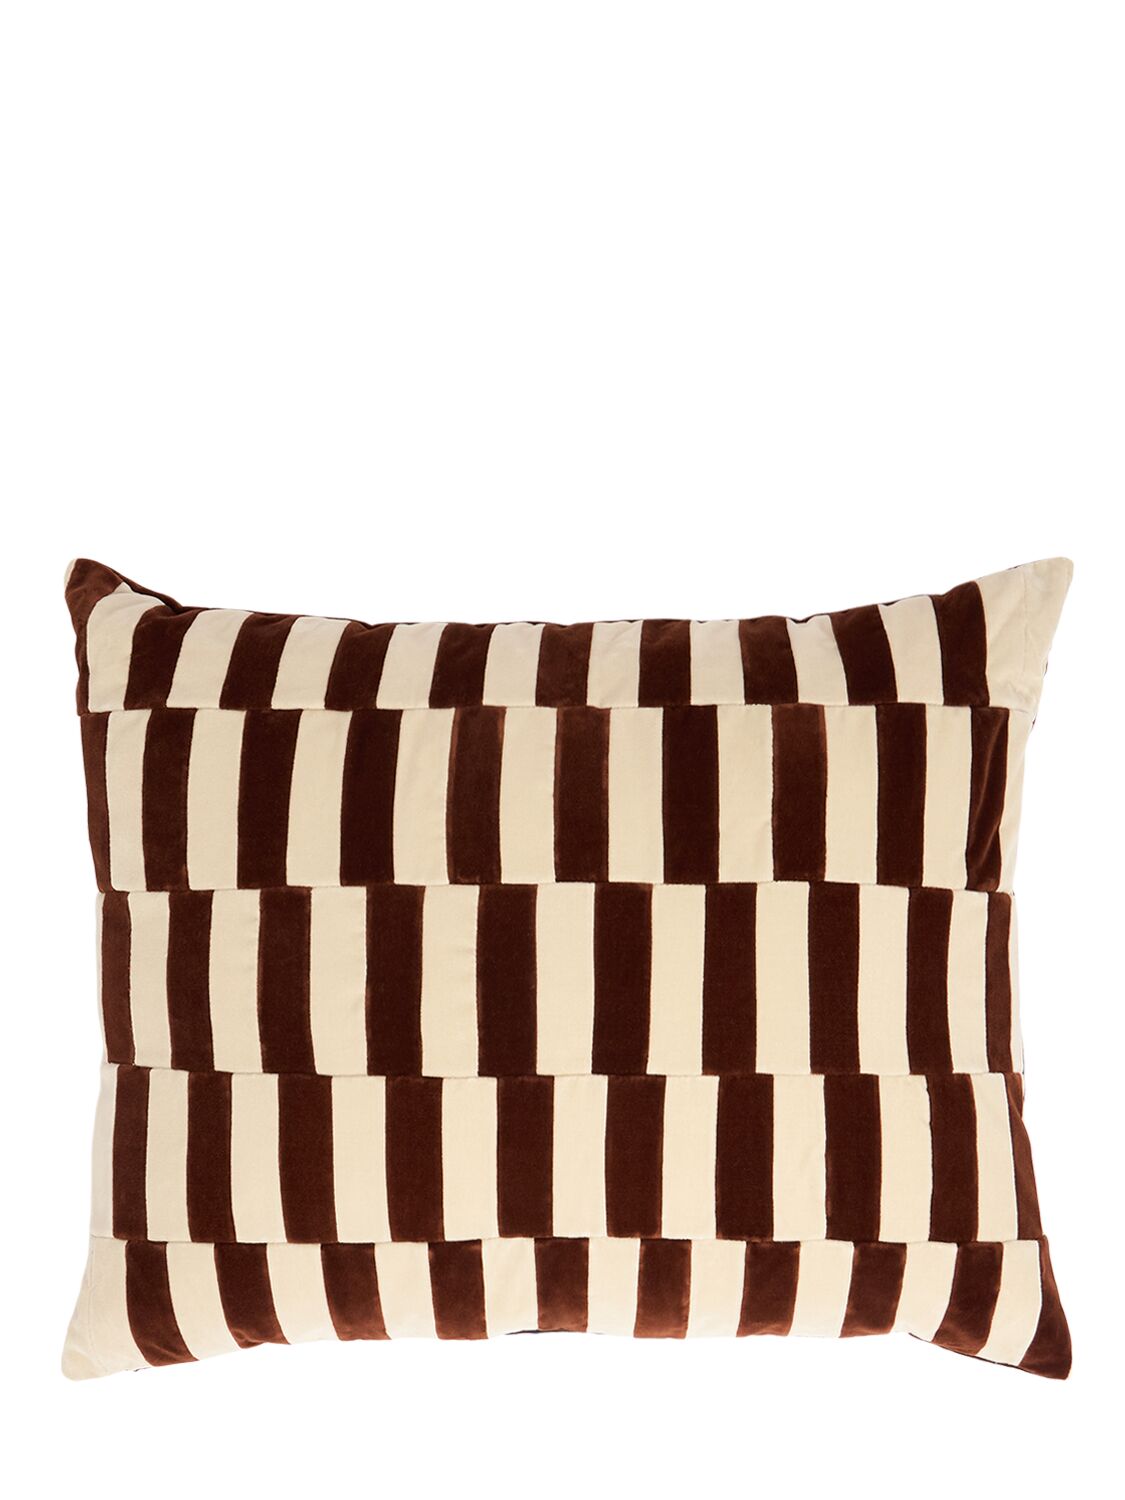 Christina Lundsteen Ally Cotton Cushion In Brown